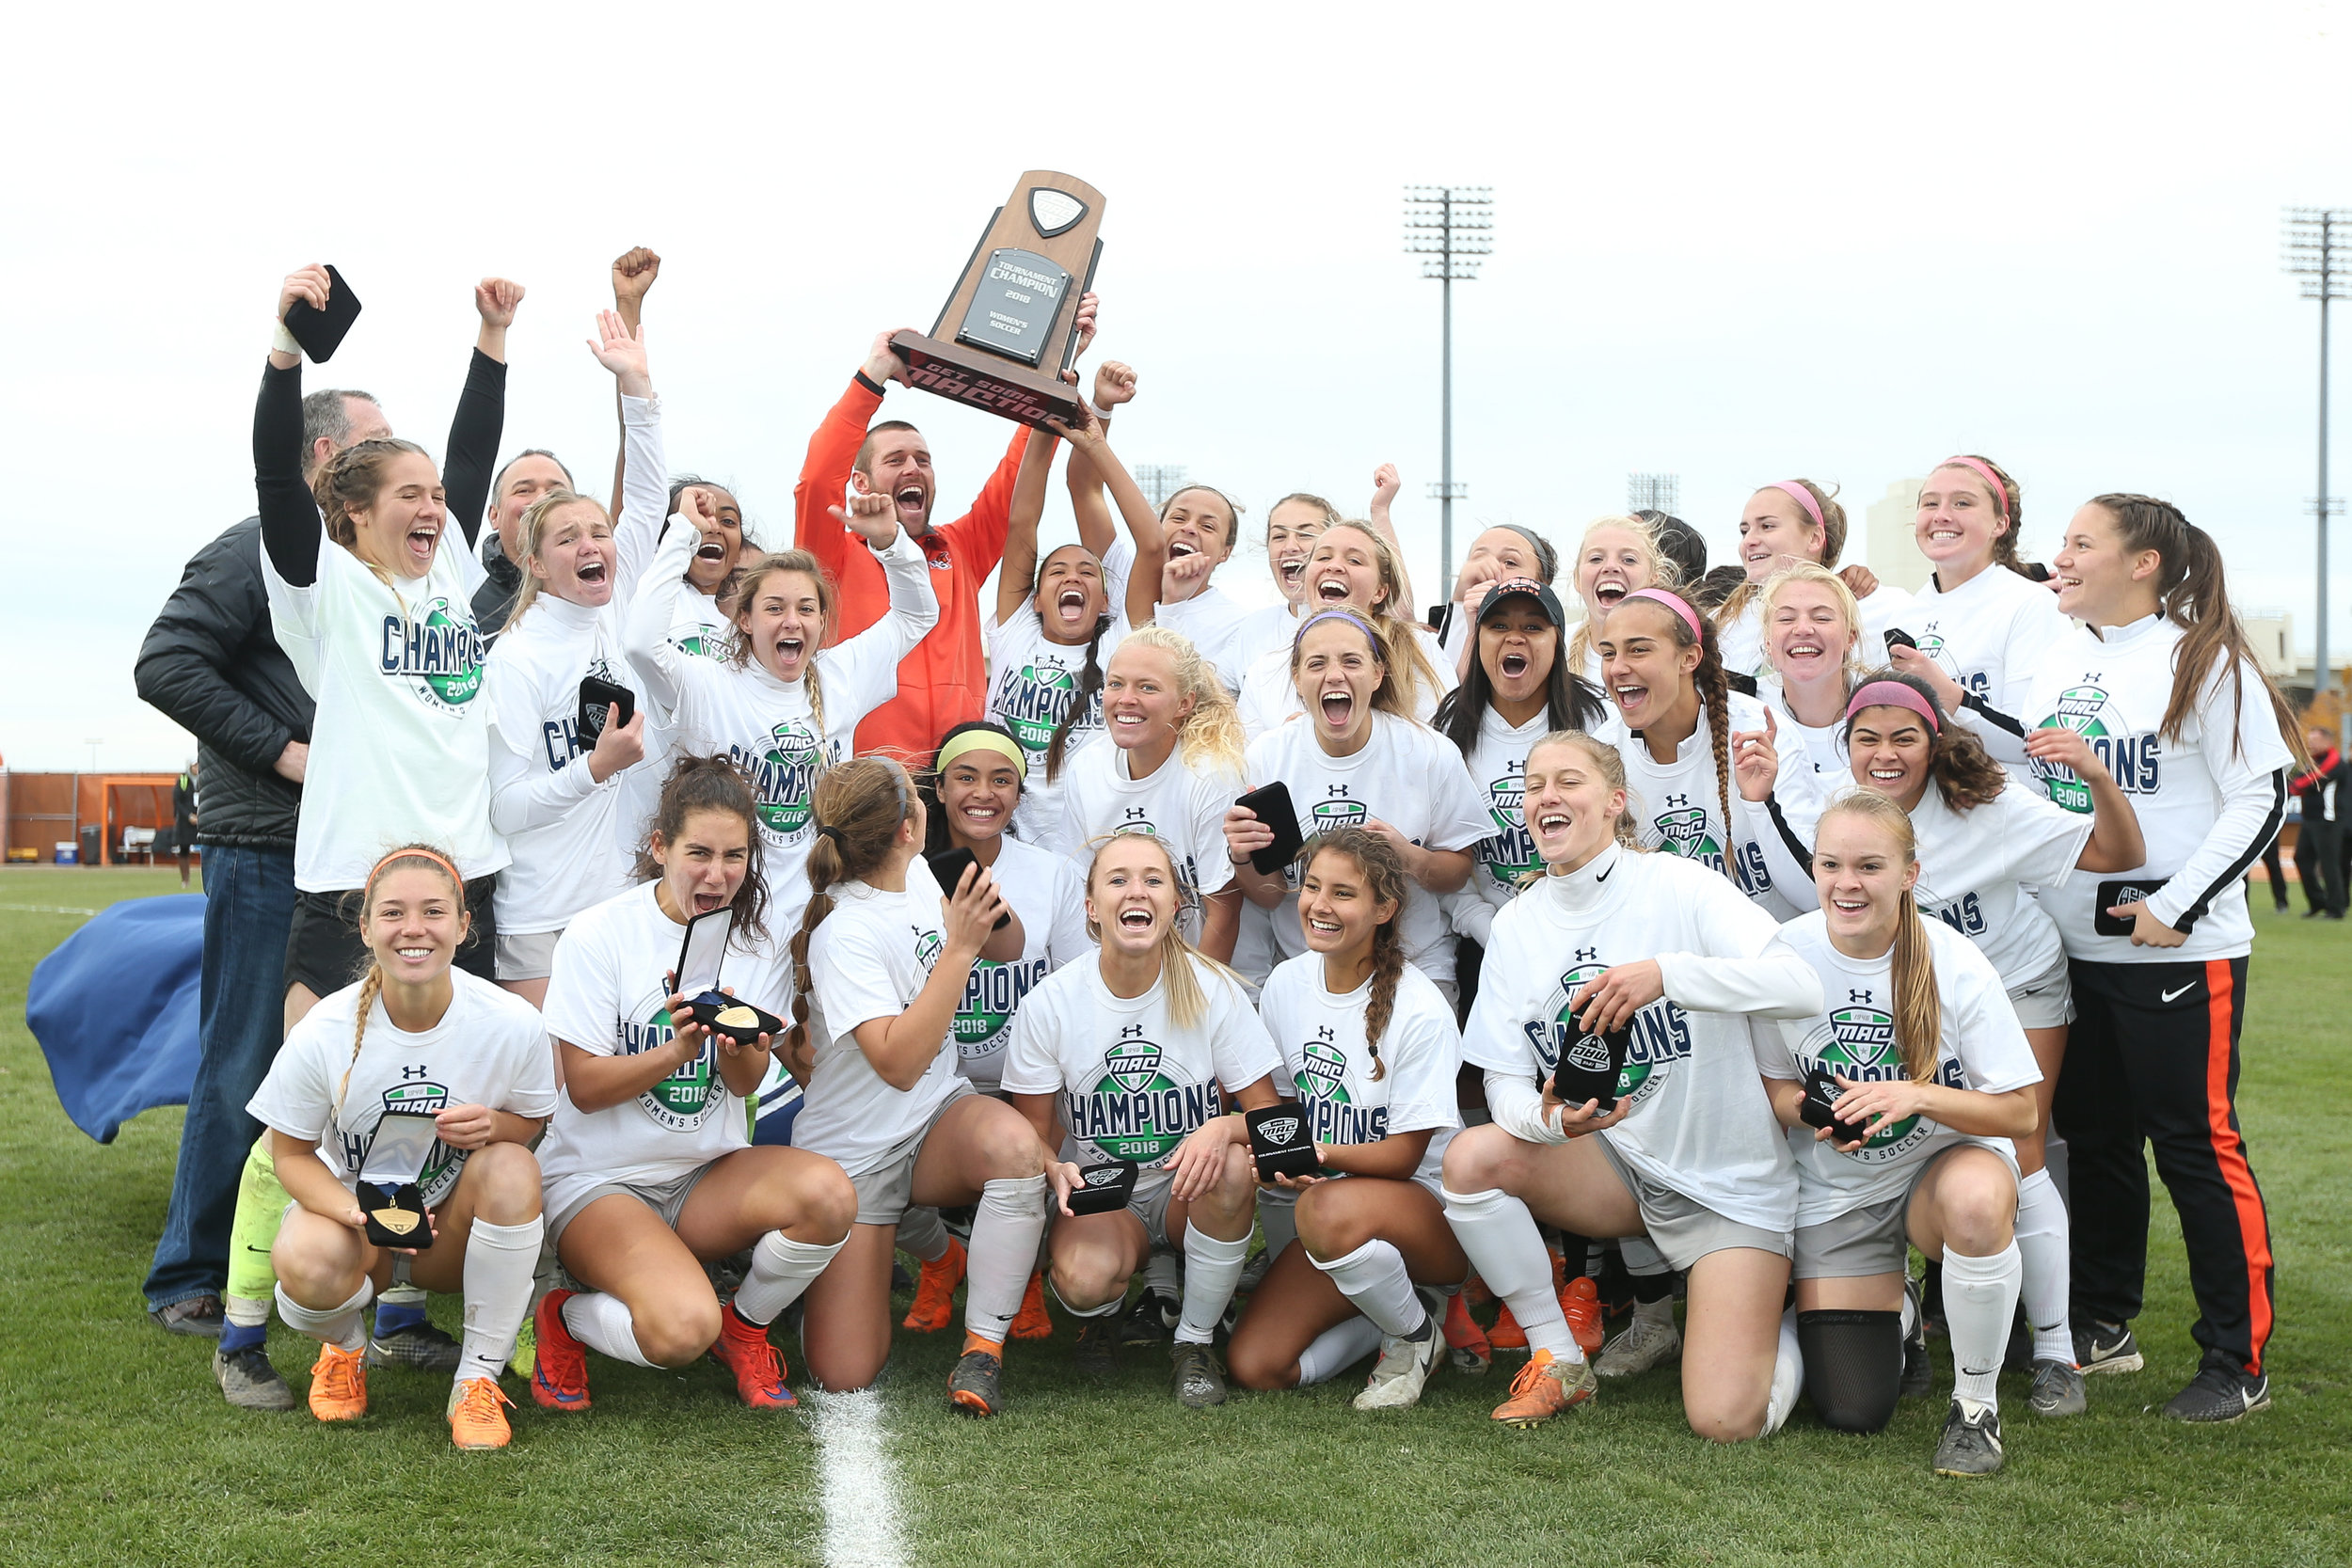 WOMEN'S SOCCER CLAIMS THE TITLE